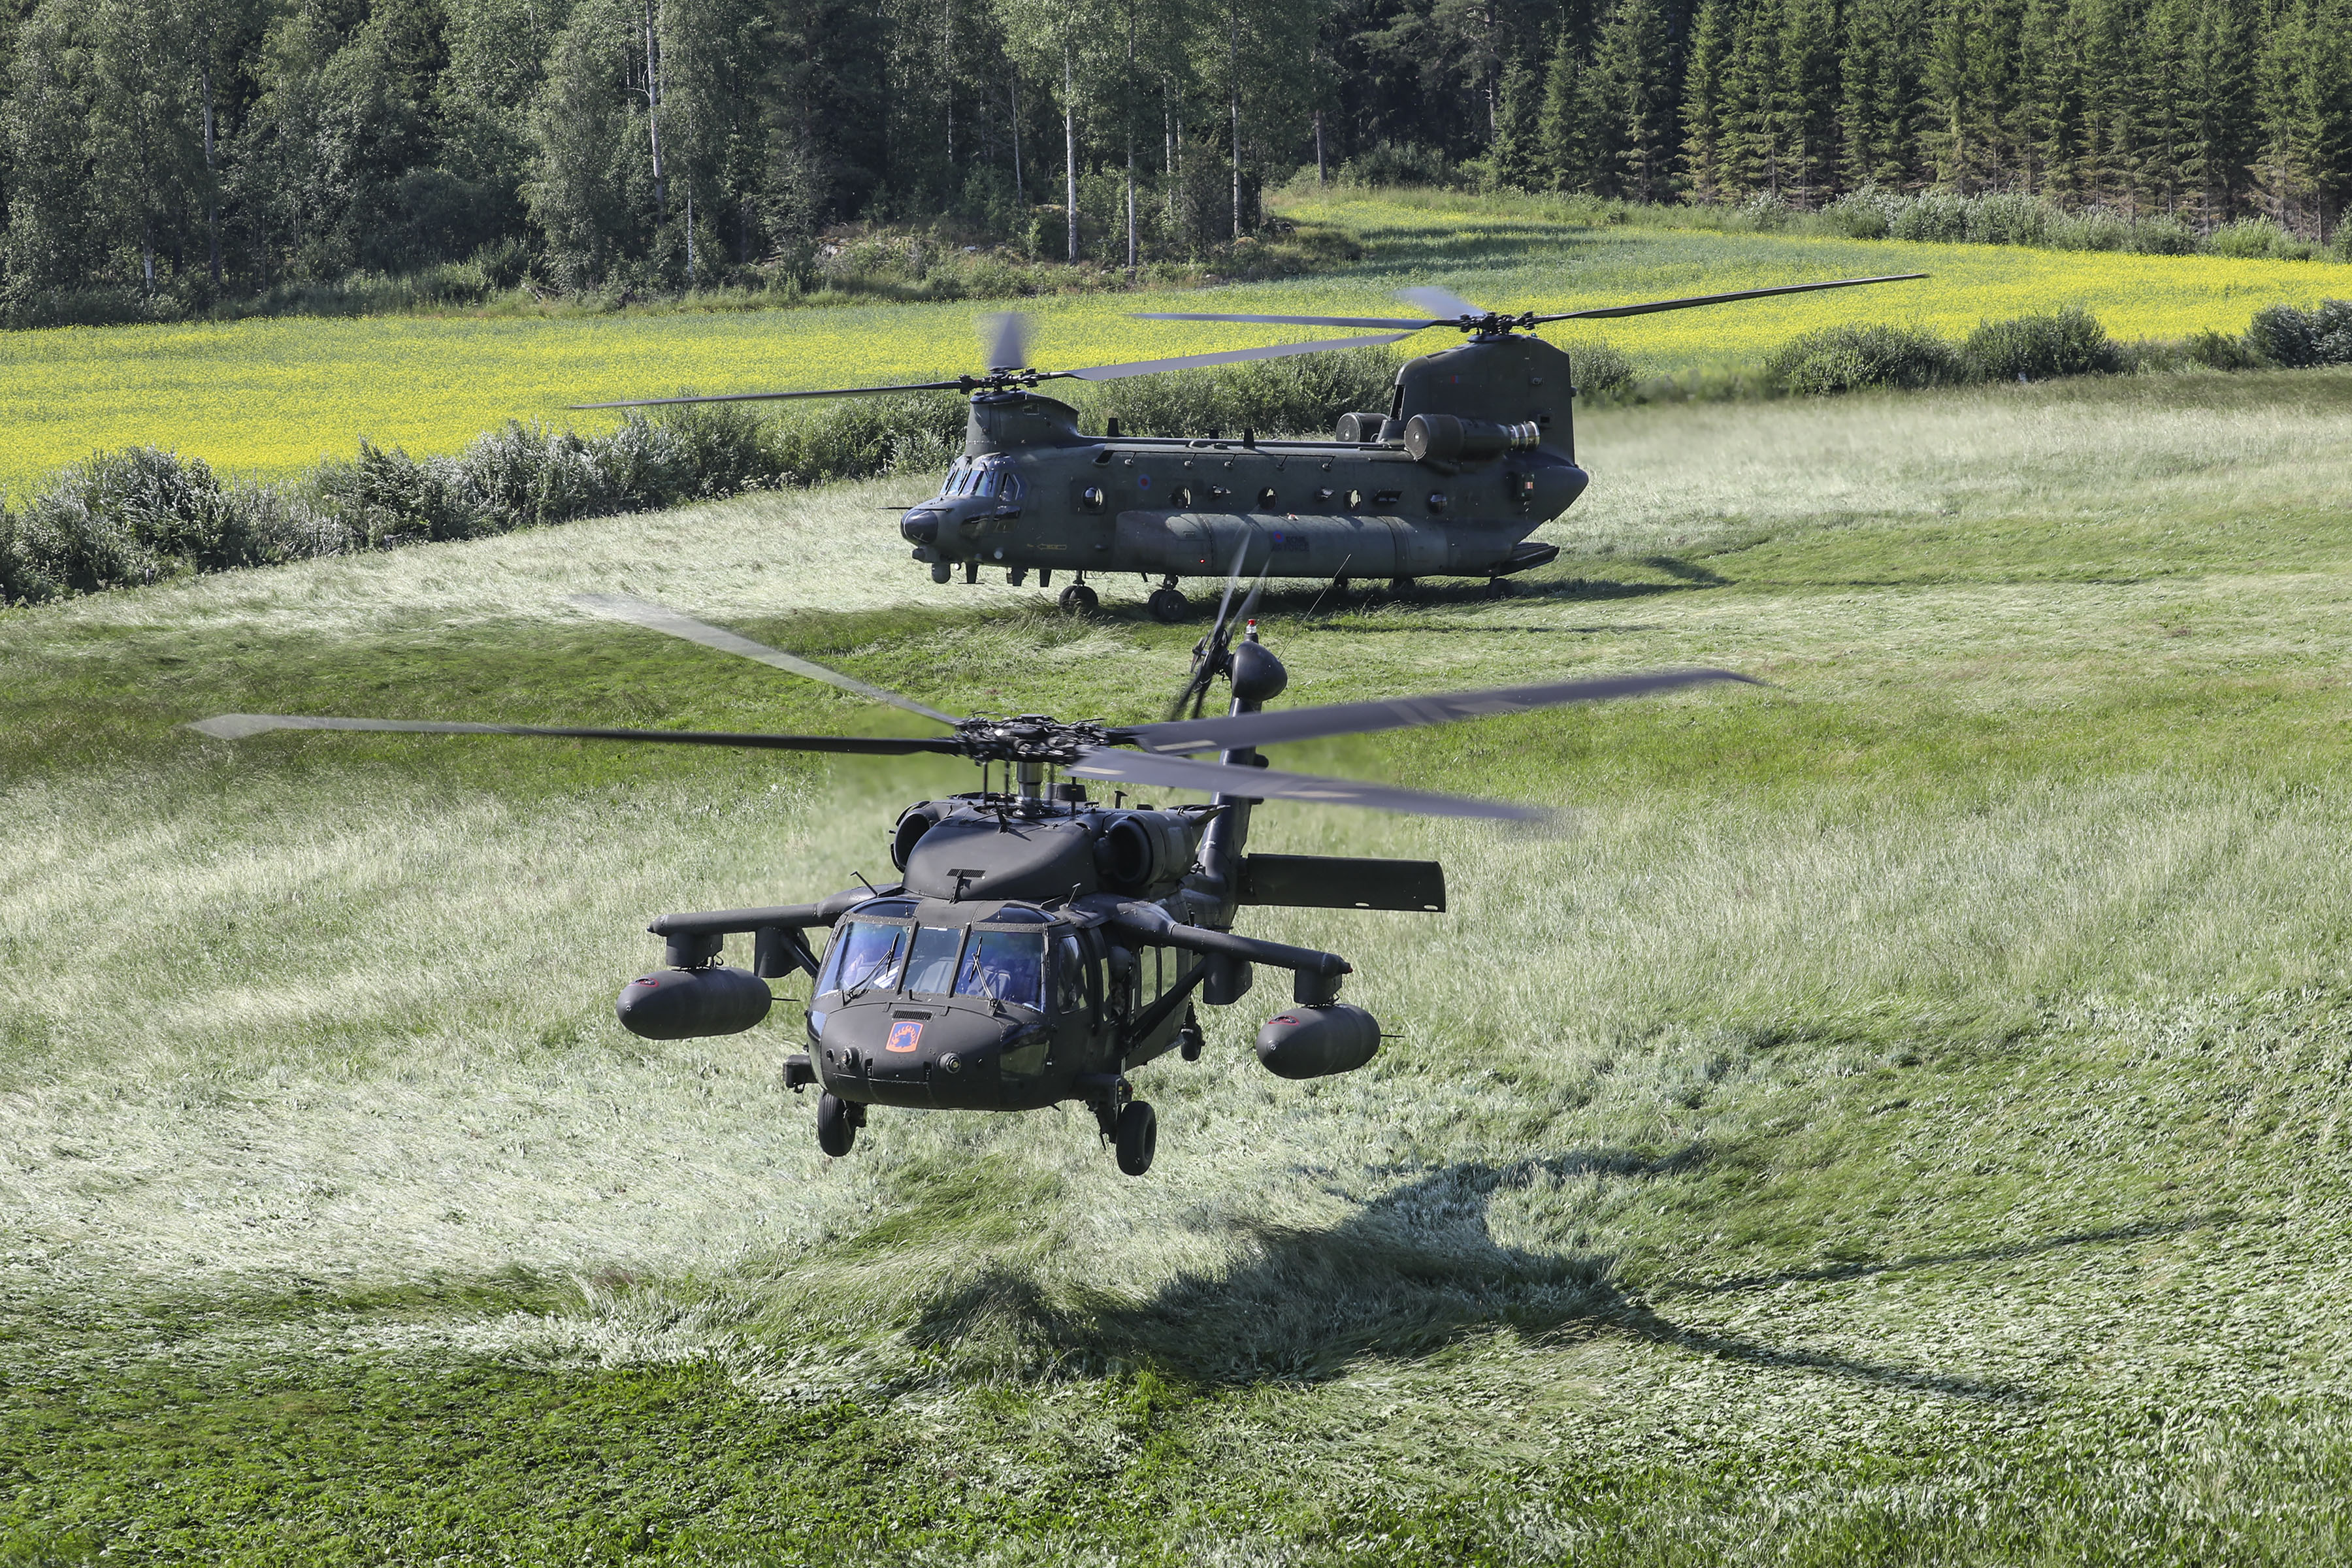 Image shows RAF Chinooks taking off over the grass.